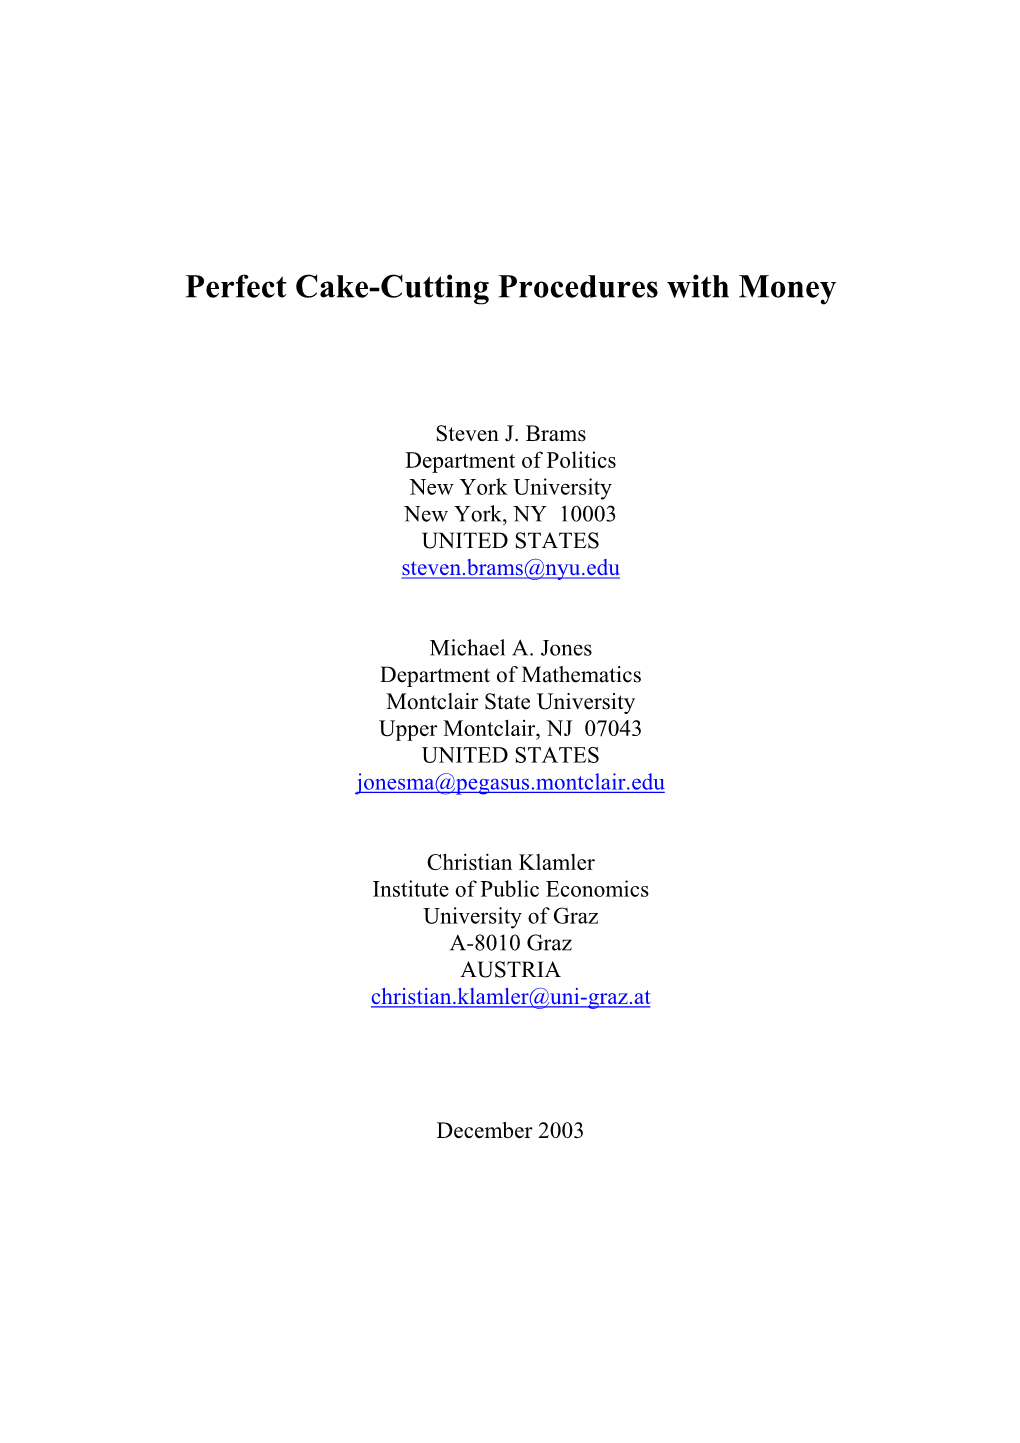 Perfect Cake-Cutting Procedures with Money